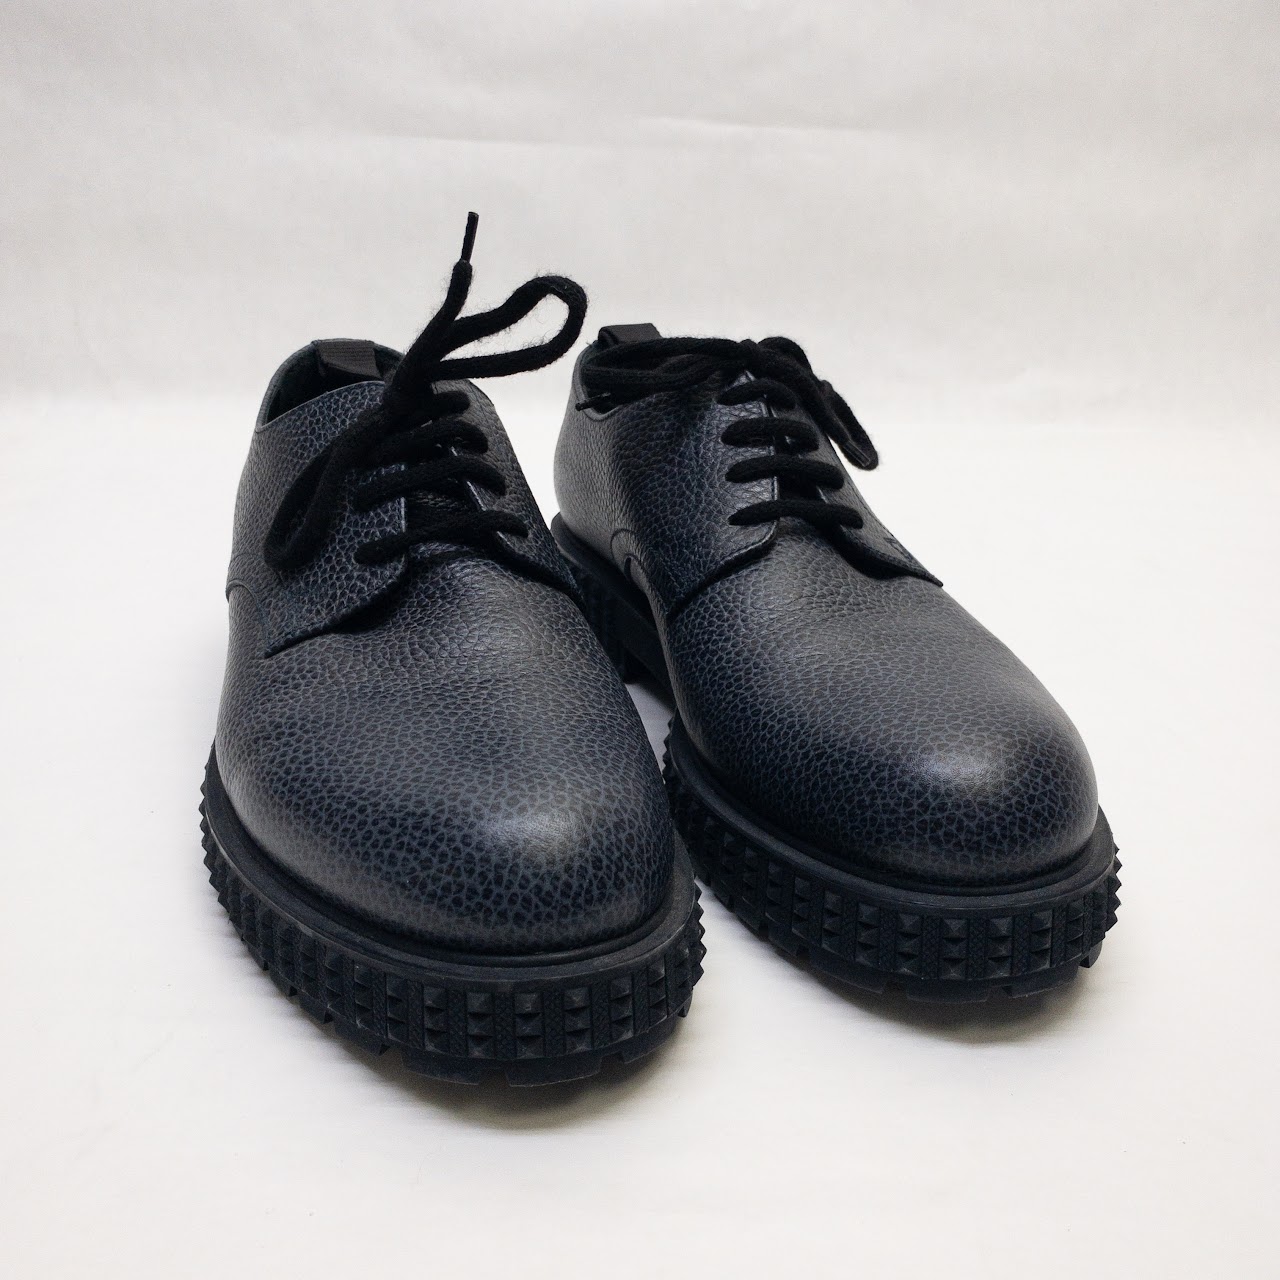 Valentino Navy Blue Pebbled Leather Rockstud Derby Shoes